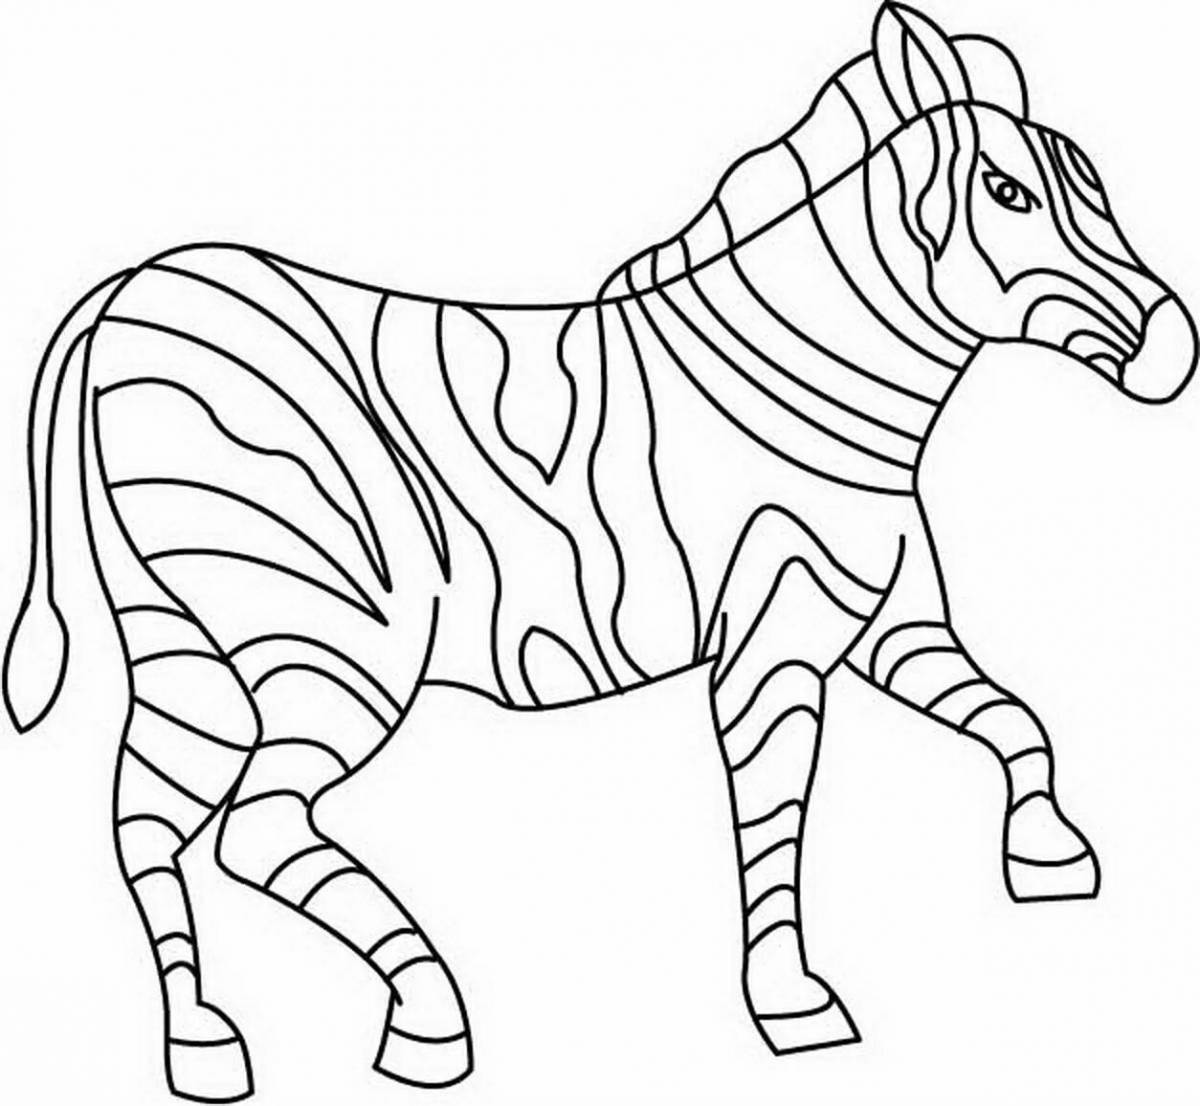 Exquisite coloring book for kids with animals from hot countries